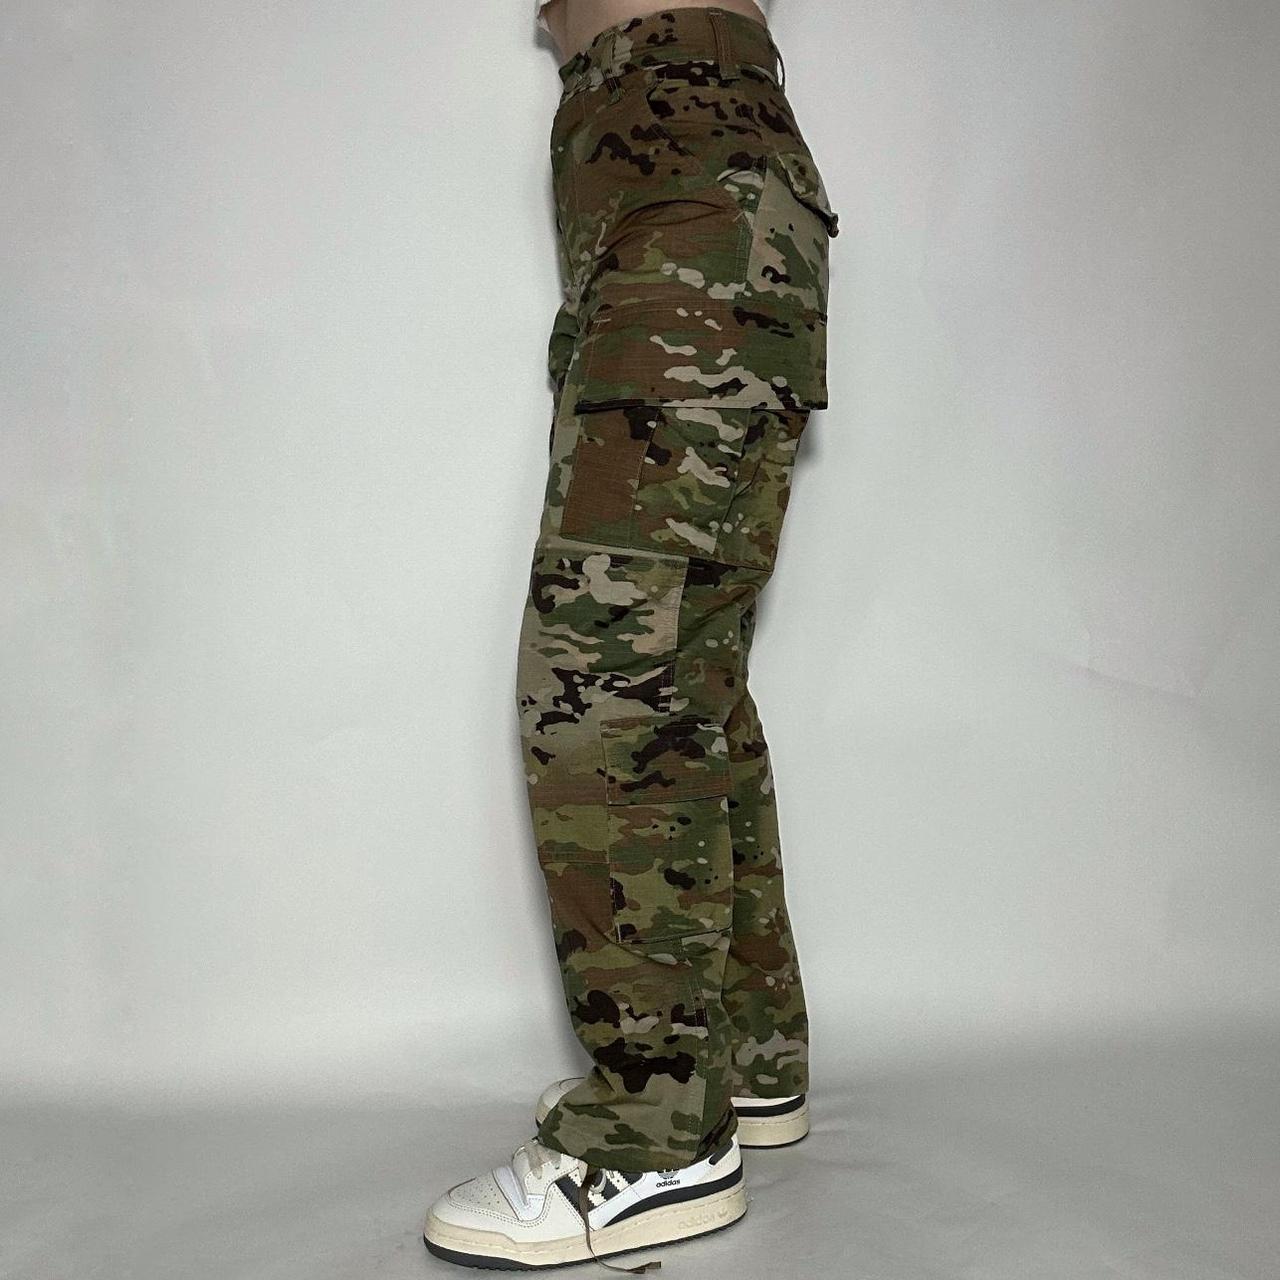 Vintage 90s high waisted unisex army camo cargo trousers